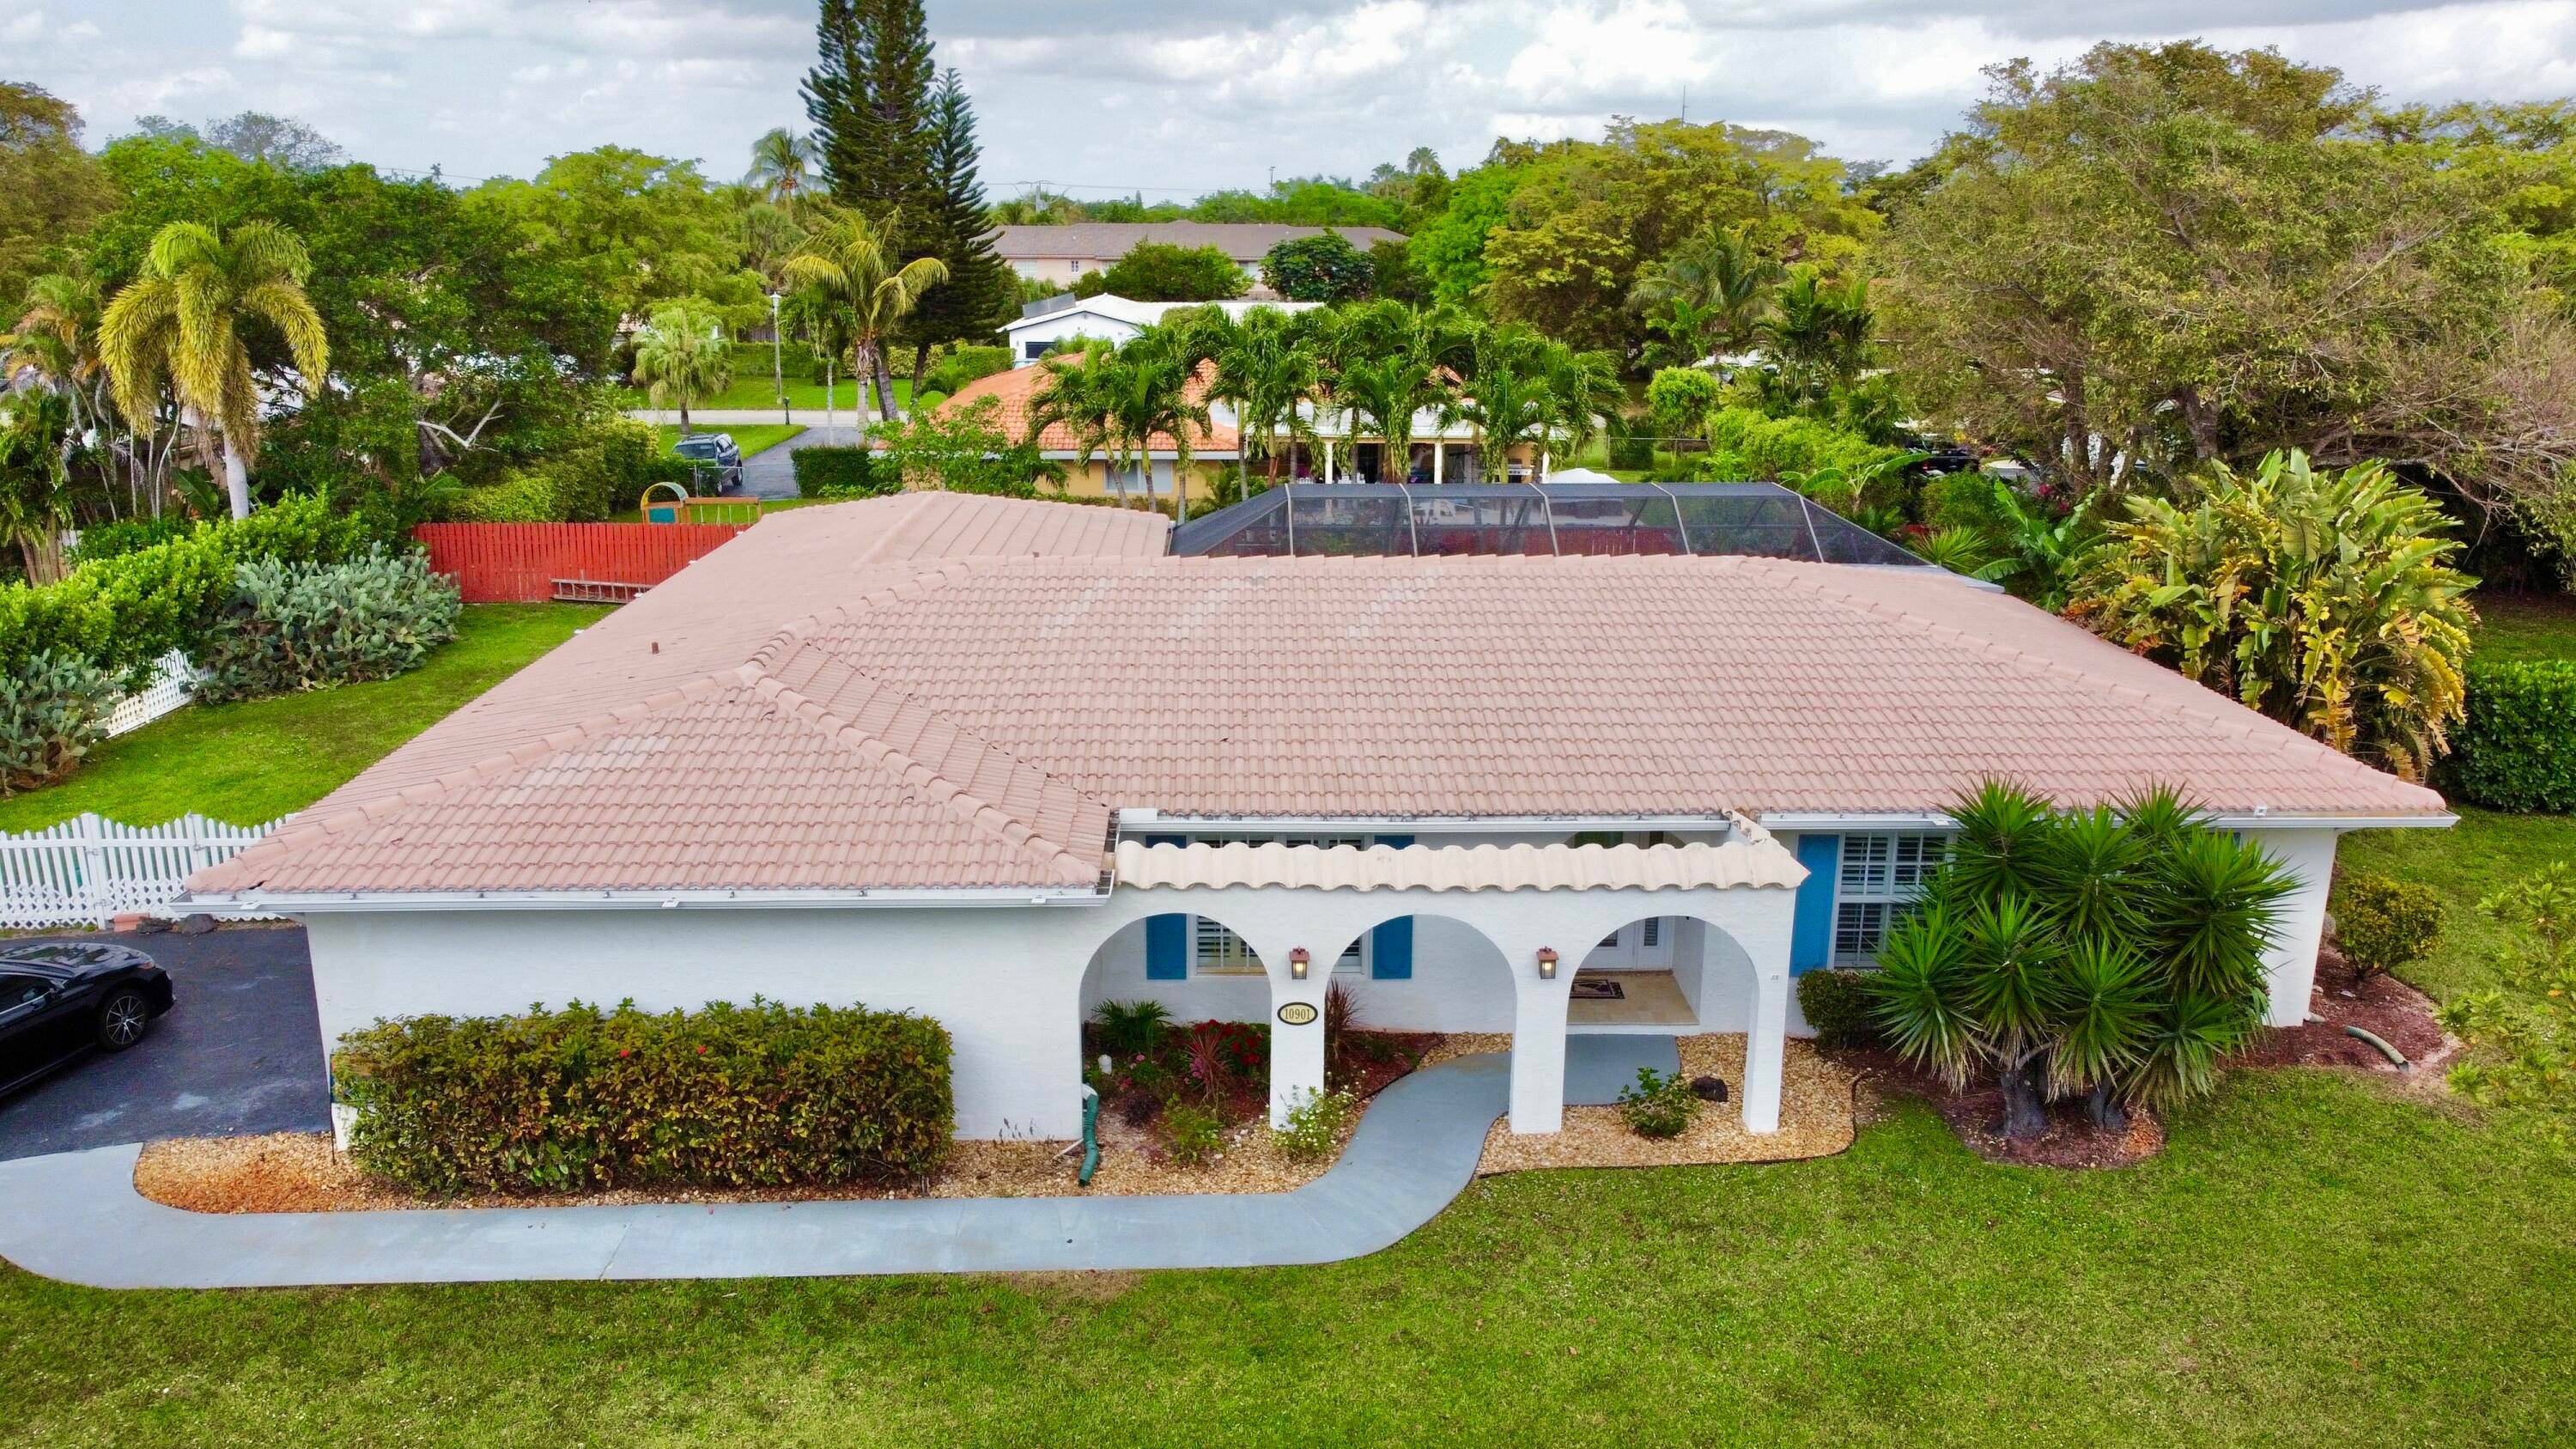 Gorgeous Pool home located in the very desirable Coral Springs Country Club neighborhood and boasts over a third of an acre lot.